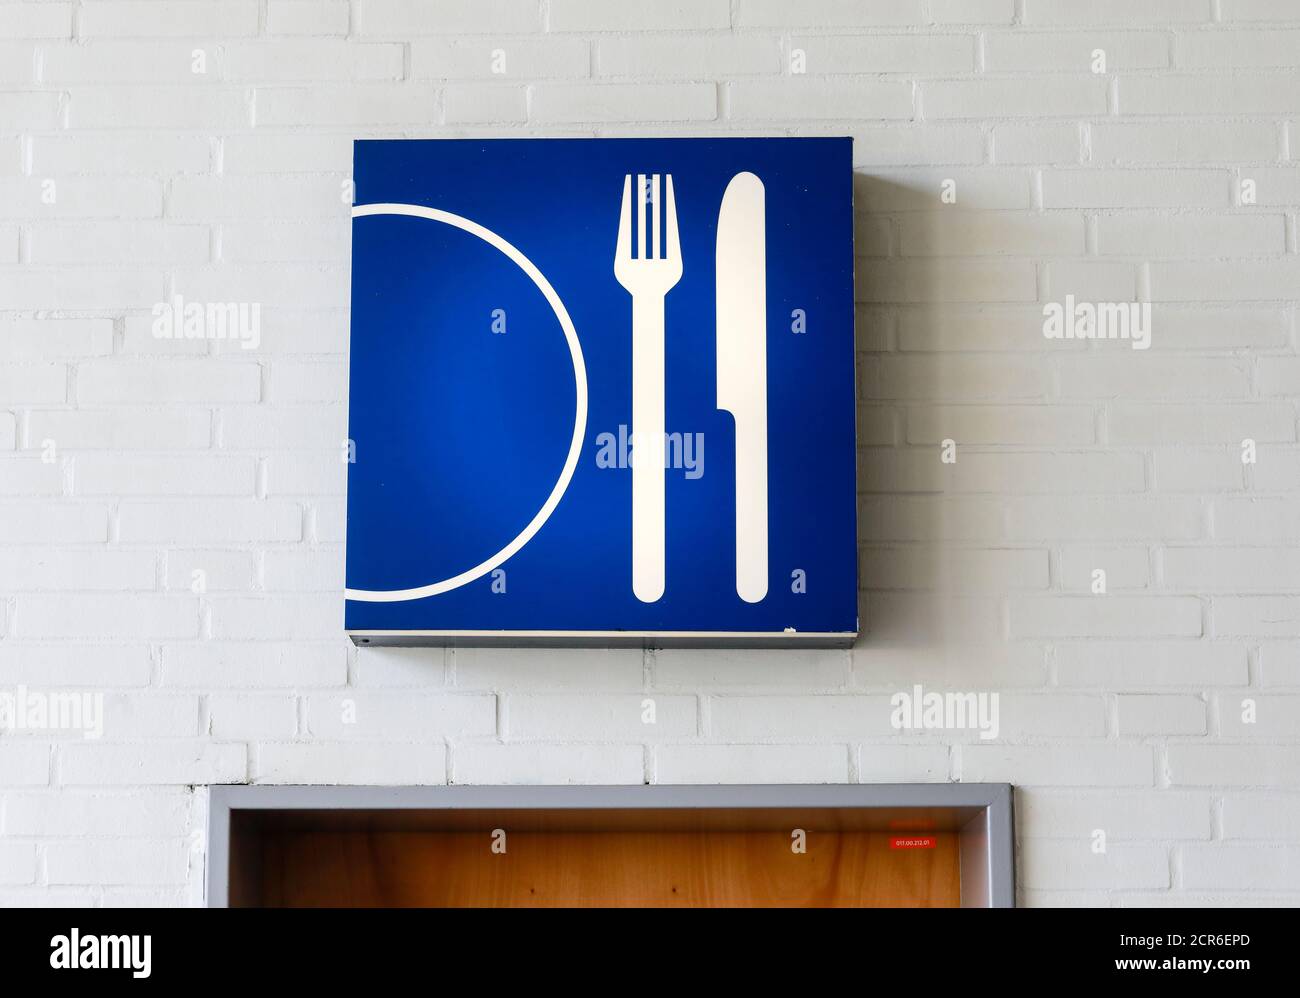 Hanover, Lower Saxony, Germany - Knife and fork with a plate symbol over a door at the Hanover Fair. Stock Photo